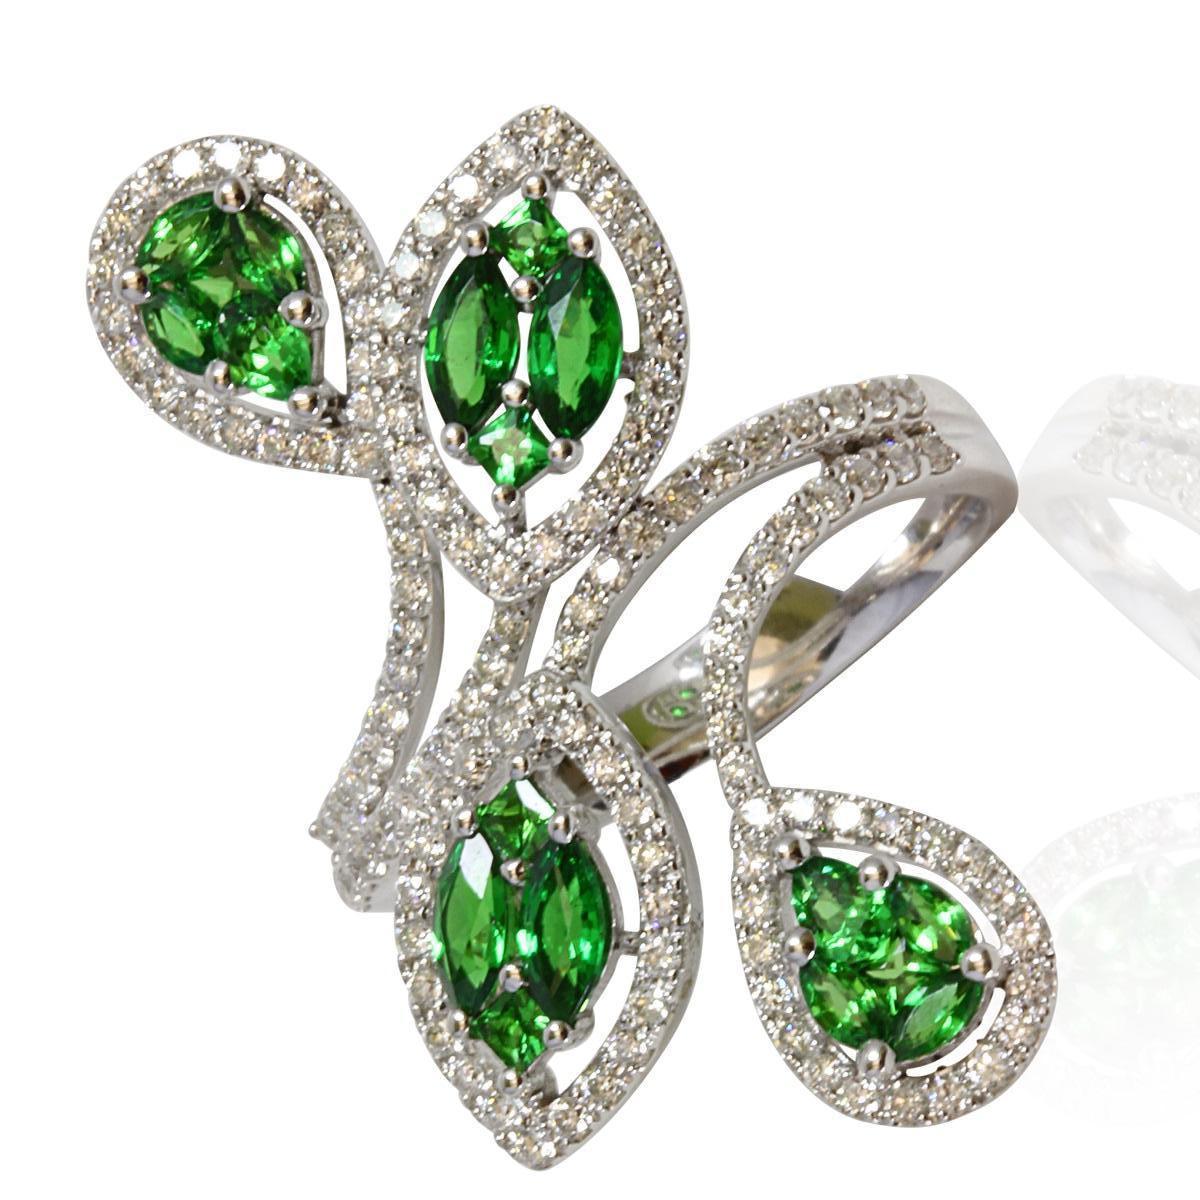 Elevate your style with this mesmerizing tsavorite and diamond ring, the ultimate statement piece that adds the perfect 'Oomph' factor to your look. Crafted in 14K white gold, the ring showcases a distinctive bypass-style design, where the band